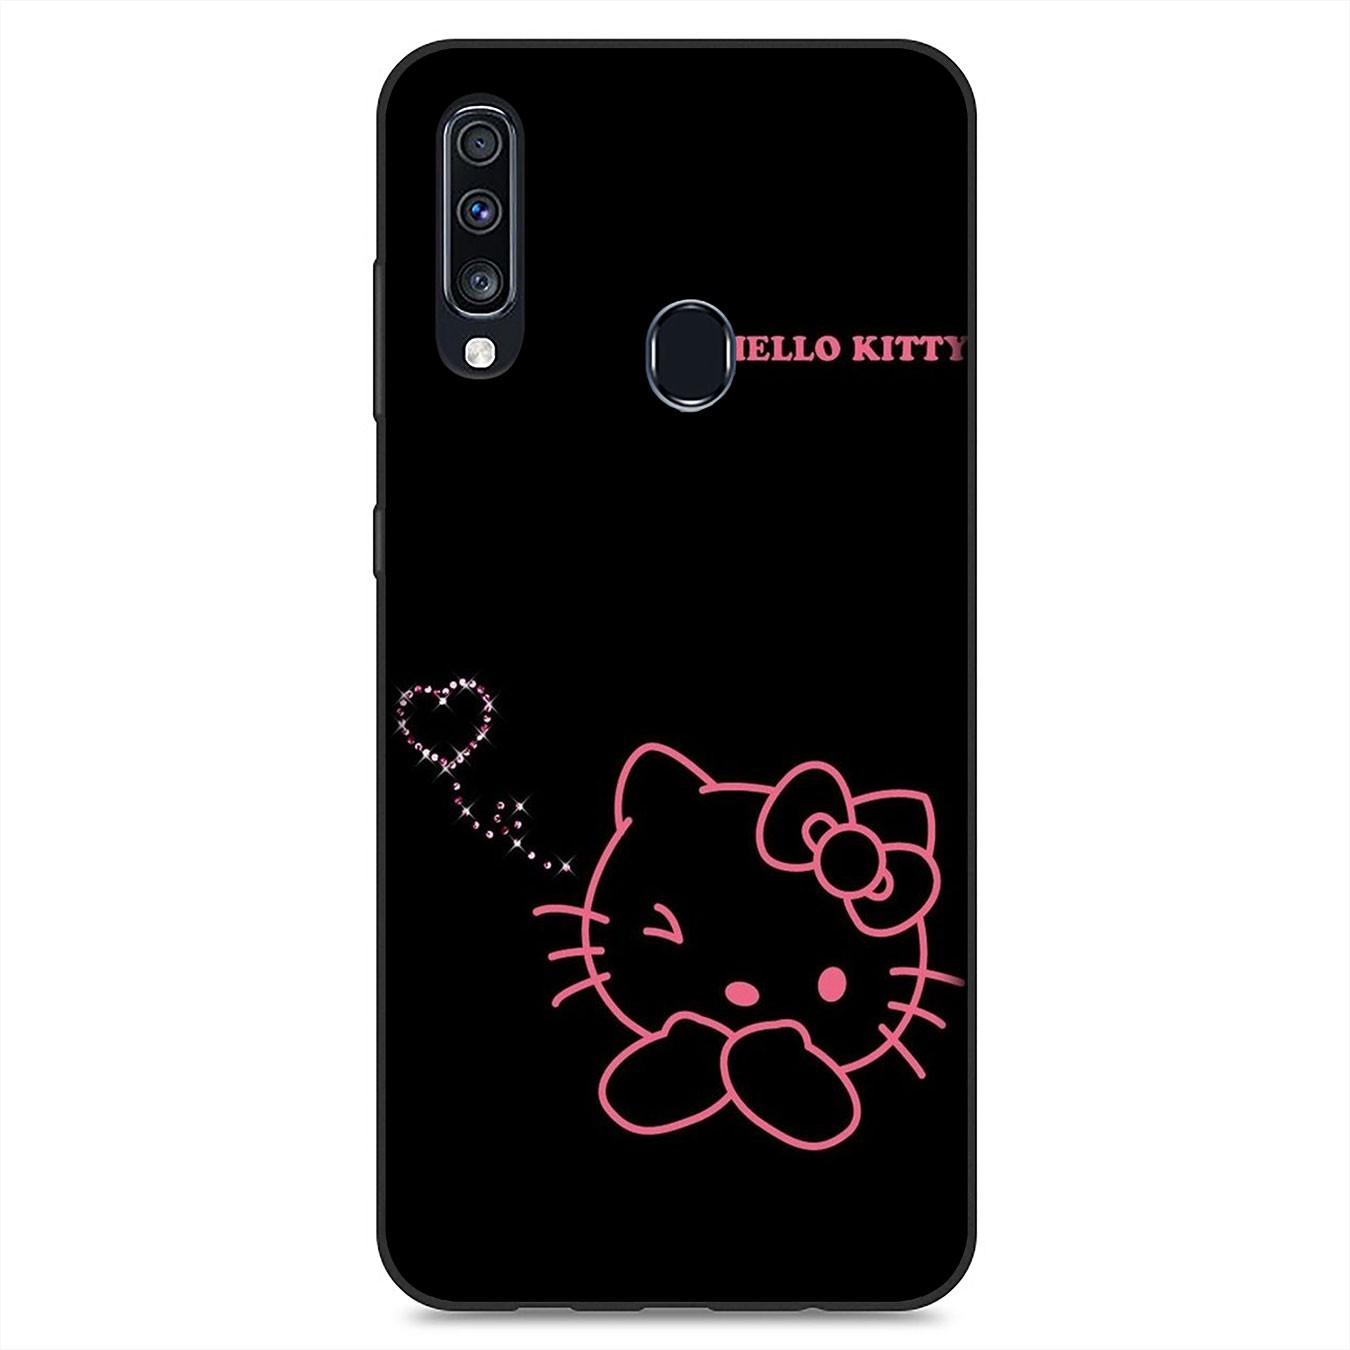 Samsung Galaxy S21 Ultra S8 Plus F62 M62 A2 A32 A52 A72 S21+ S8+ S21Plus Casing Soft Silicone Phone Case CUTE Hello Kitty Cover